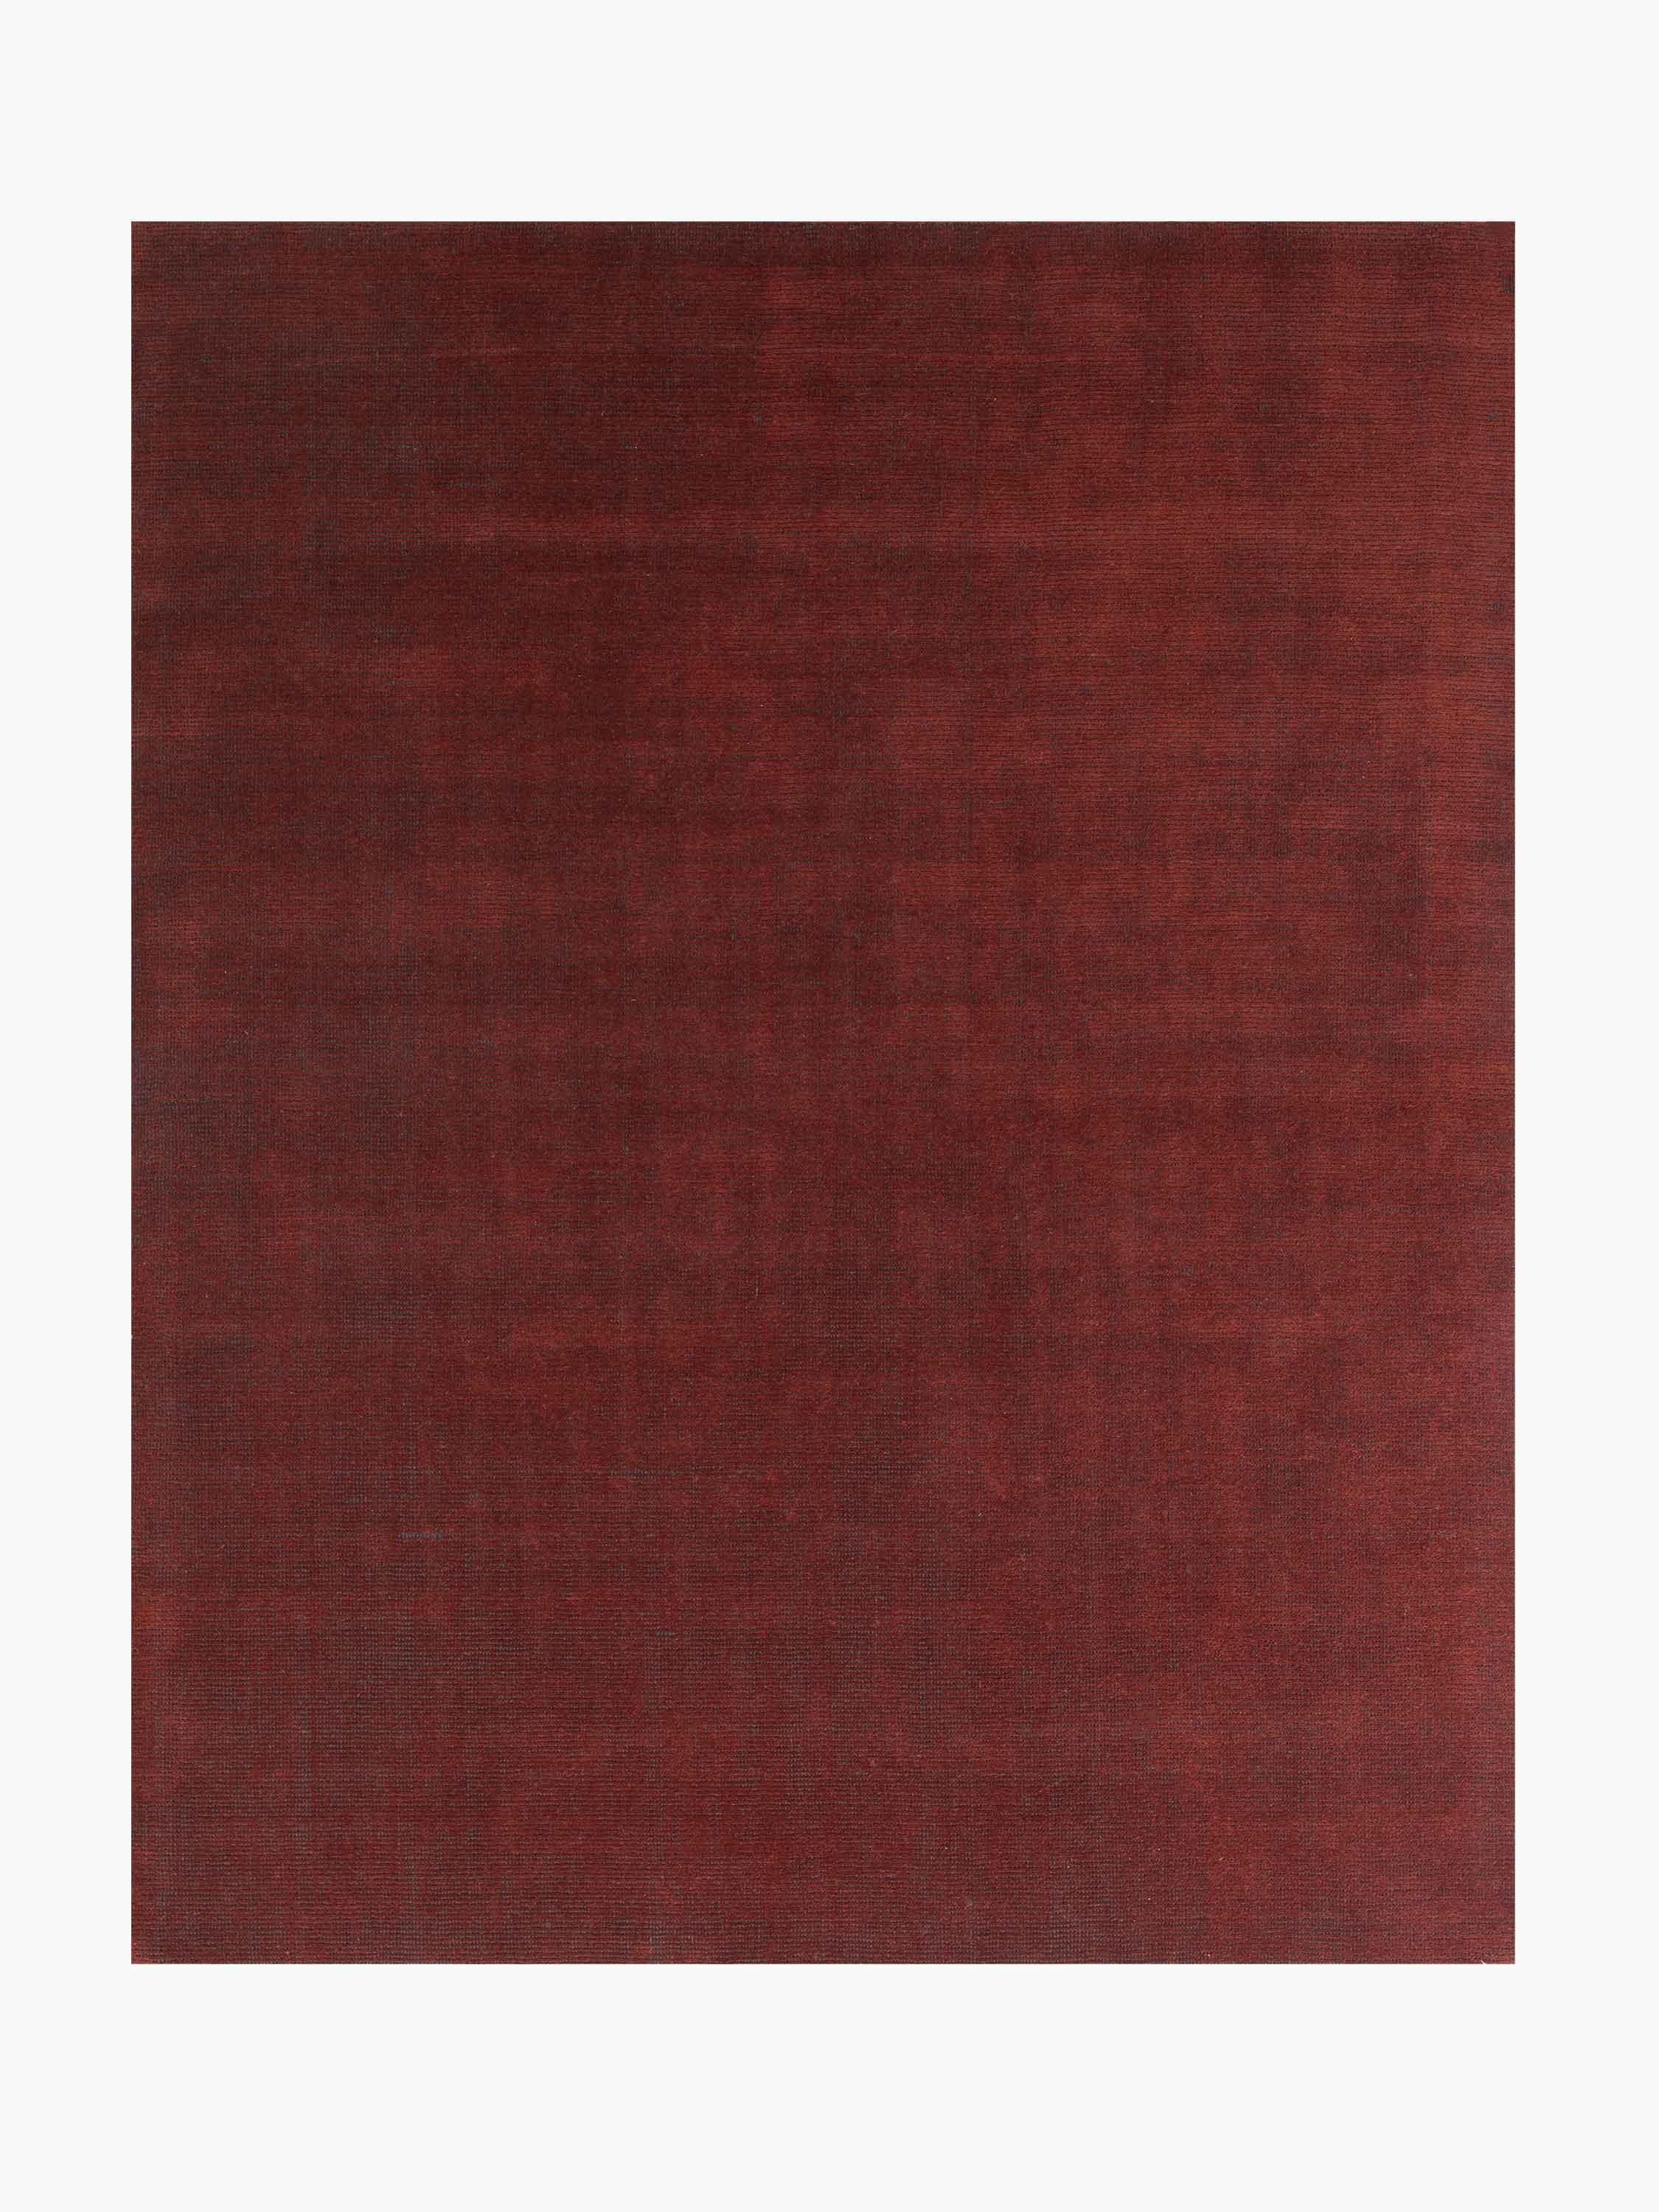 For Sale: Red (Distressed Wool Amber) Ben Soleimani Distressed Wool Rug 9'x12' 2